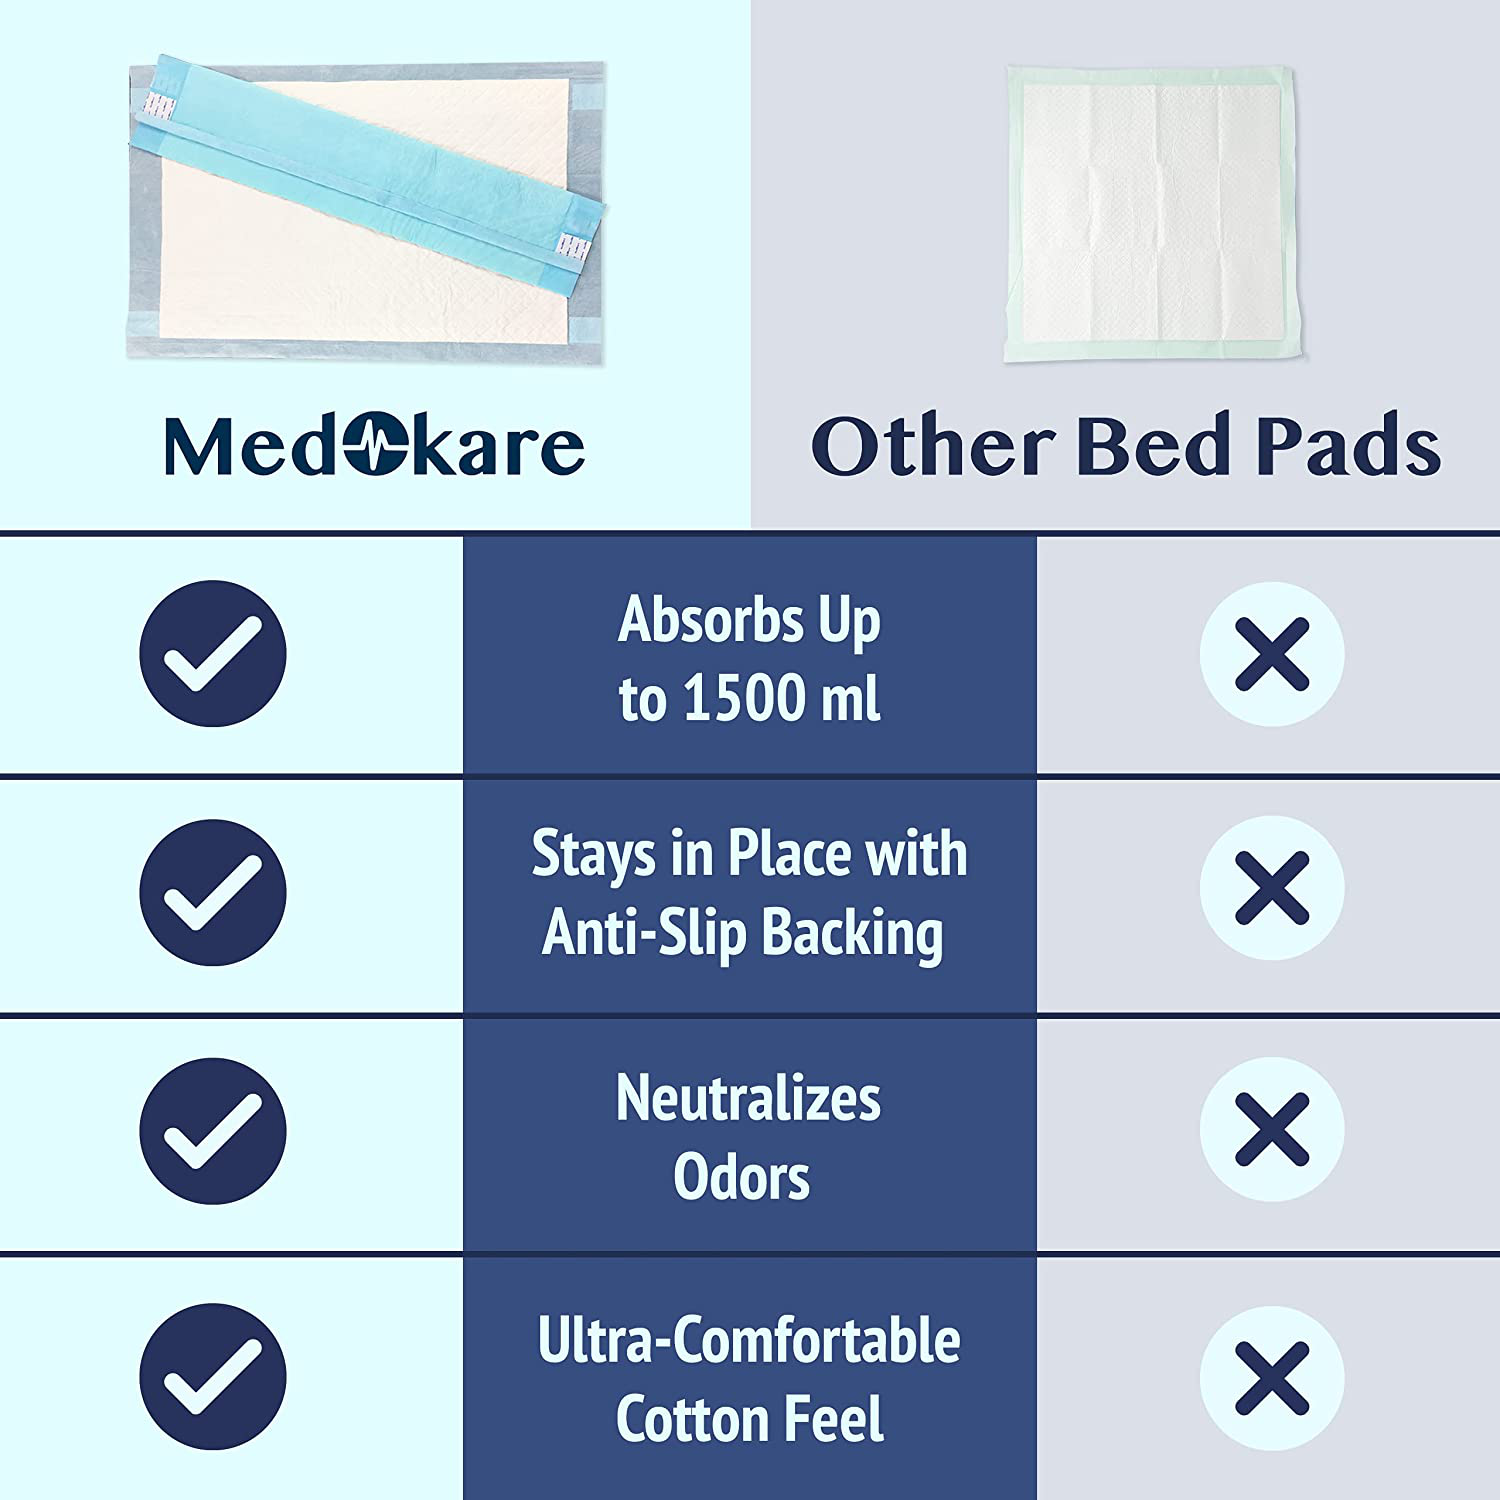 Medokare Bed Pads for Incontinence - 36 Pack, 36In X 24In, Disposable, Adhesive, Water-Resistant for Seniors, Adults and Kids Bedwetting - Hospital Medical Supplies, Chuck Pads for Home